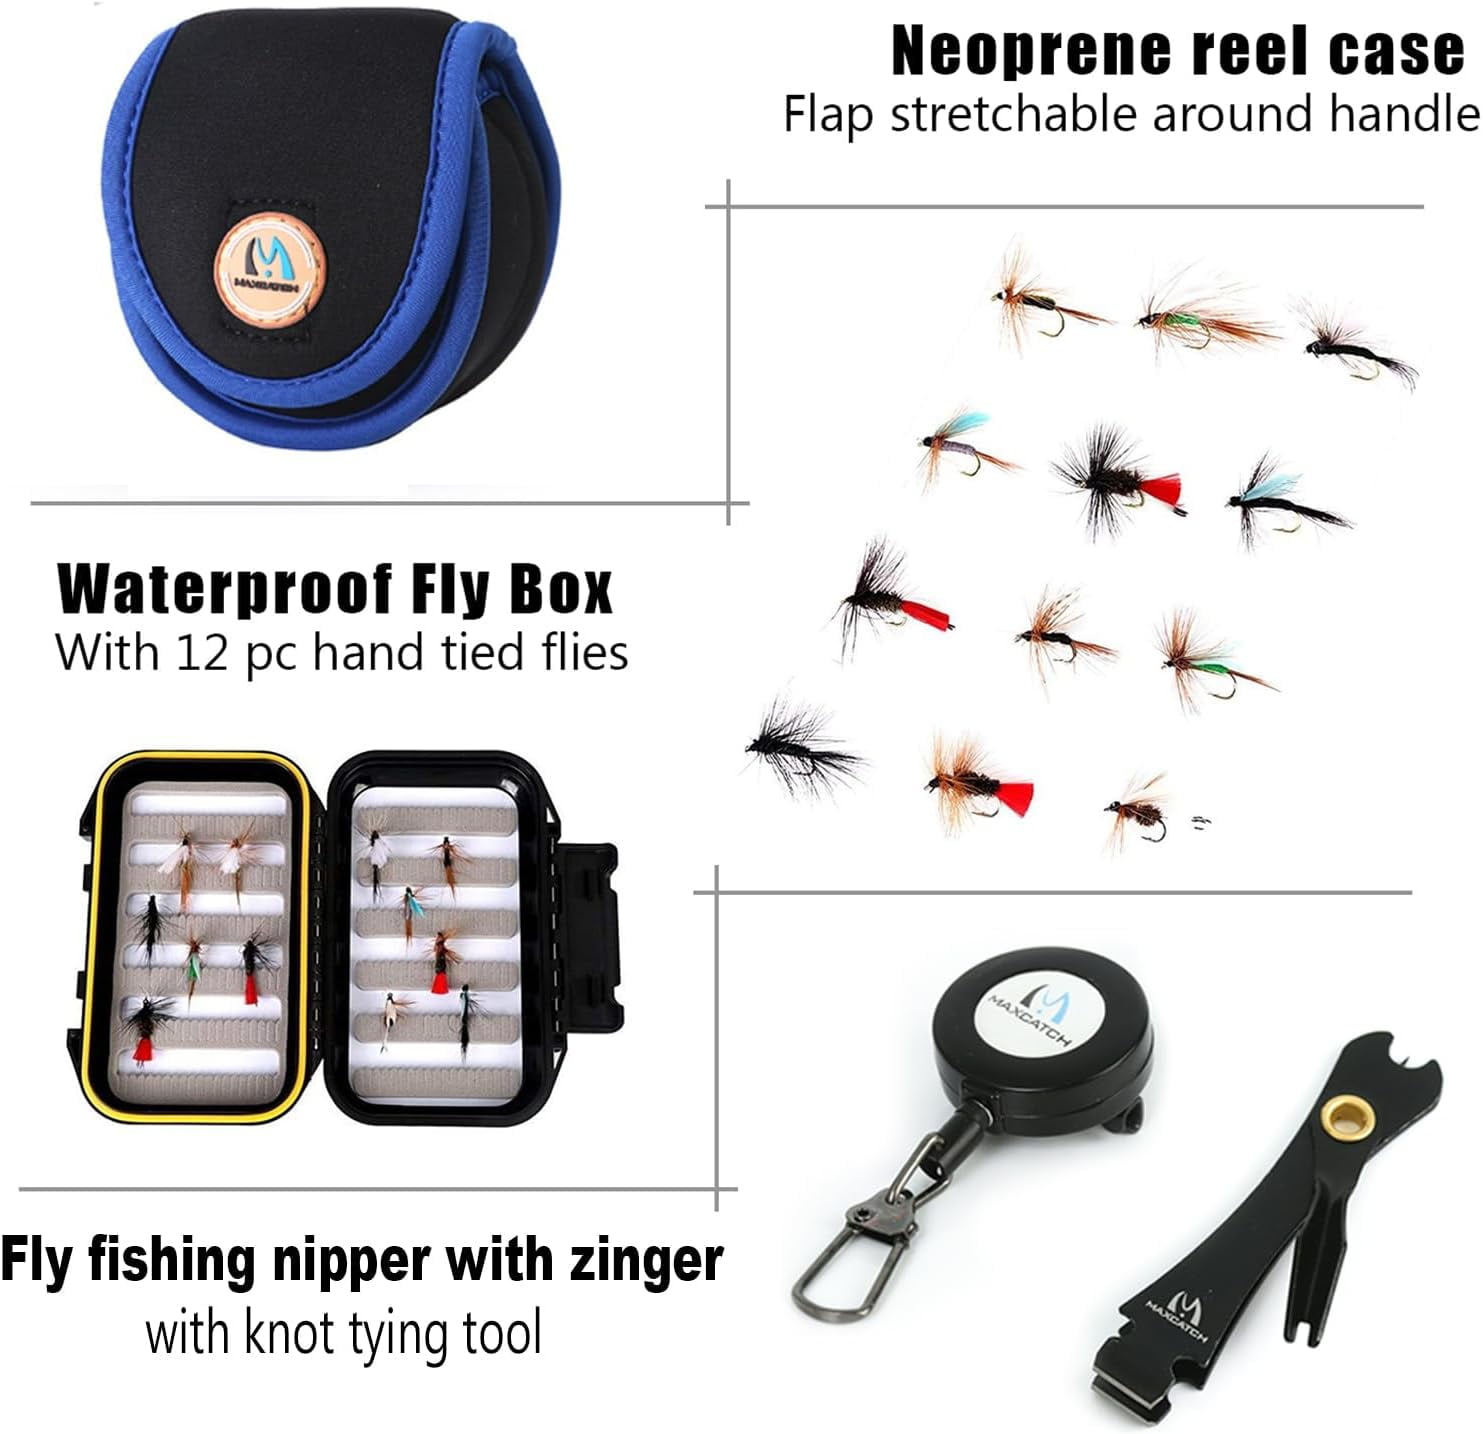 M MAXIMUMCATCH Maxcatch Extreme Fly Fishing Combo Kit 3/ Weight, Starter Fly  Rod and Reel Outfit, with a Protective Travel Case 5wt 9 0 4pc Rod,5/6 Reel  